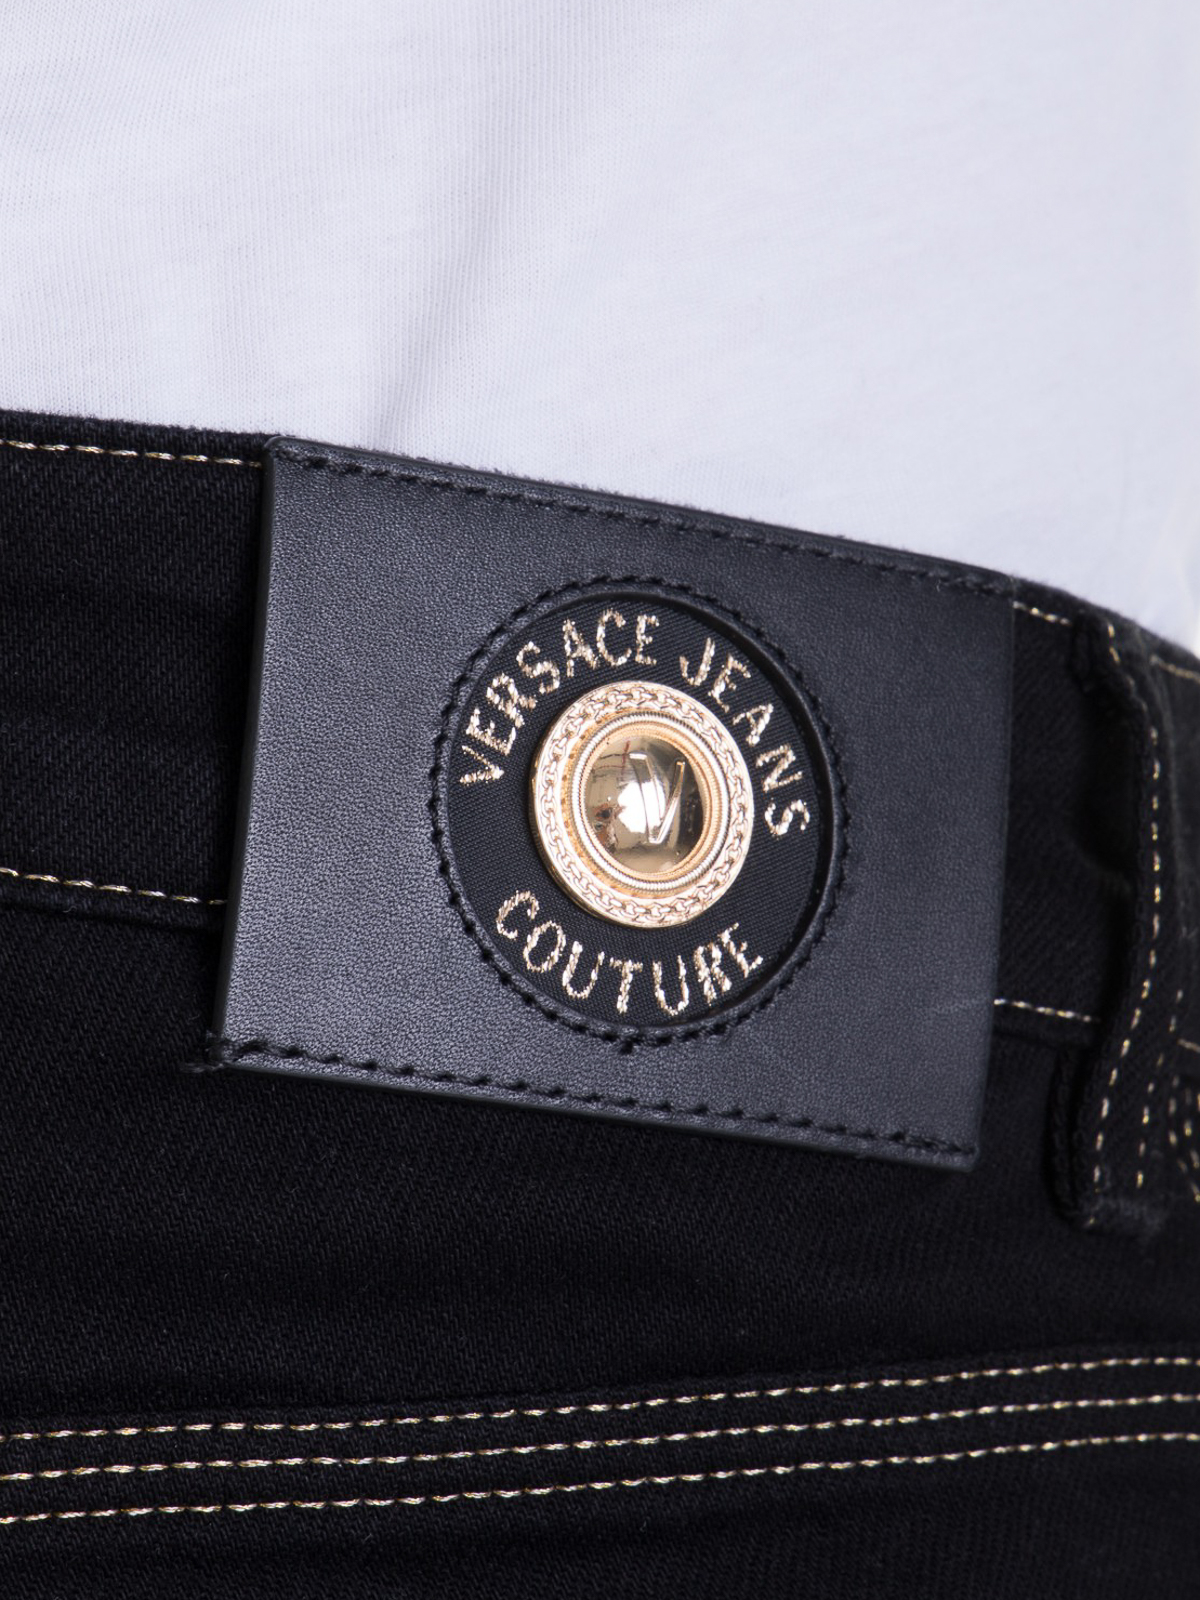 versace jean couture